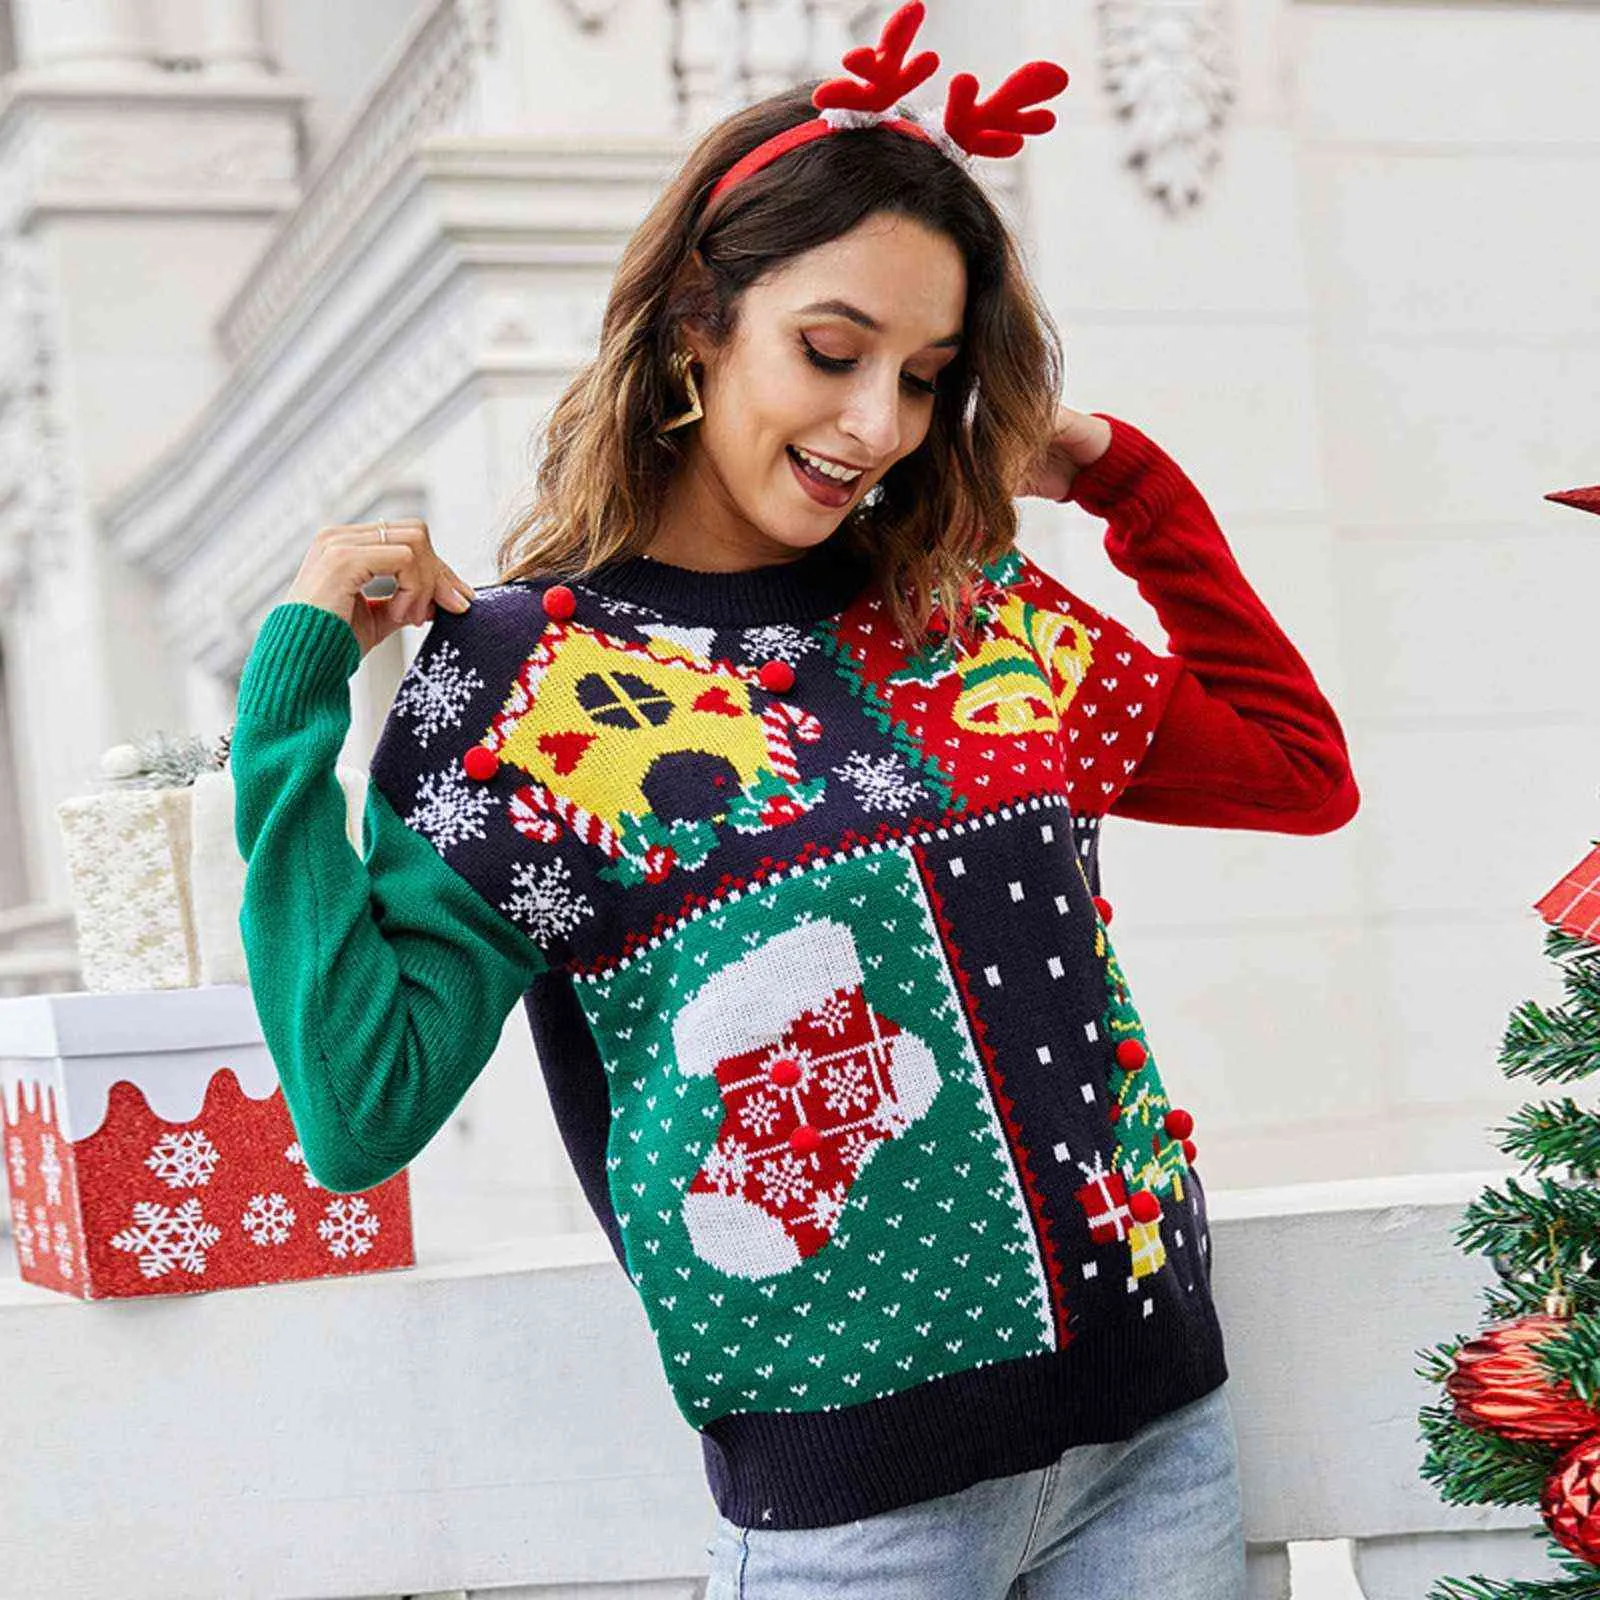 Winter Women's Ugly Christmas Sweater Little Snowflake Knitted Dress And Christmas Tree Sweater With Bells On Chest Y1118